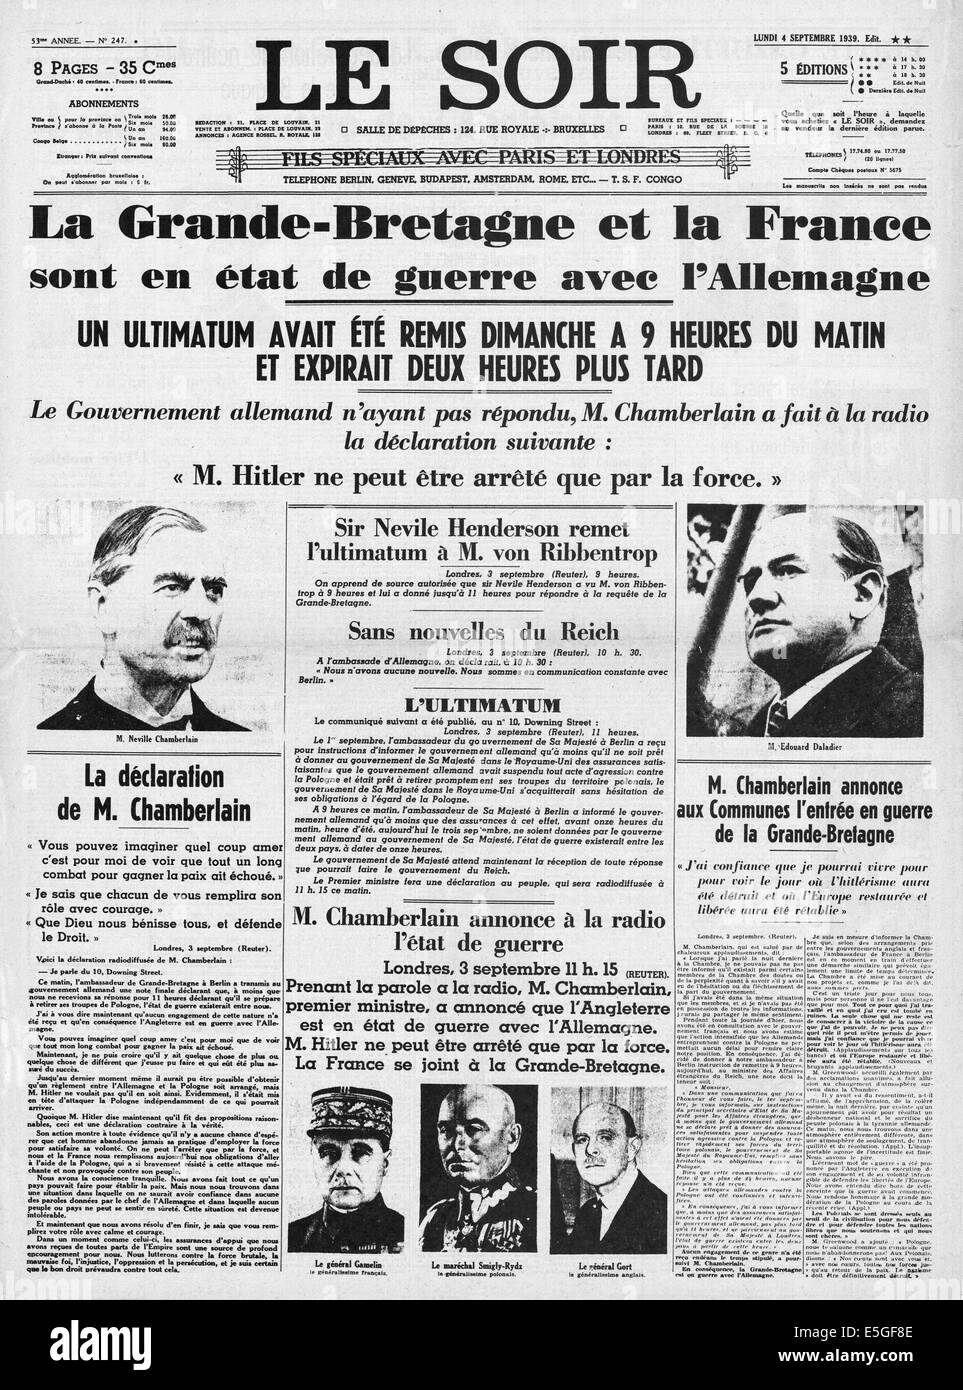 1939 Le Soir (France) front page reporting declaration of war by Britain and France on Germany. Stock Photo